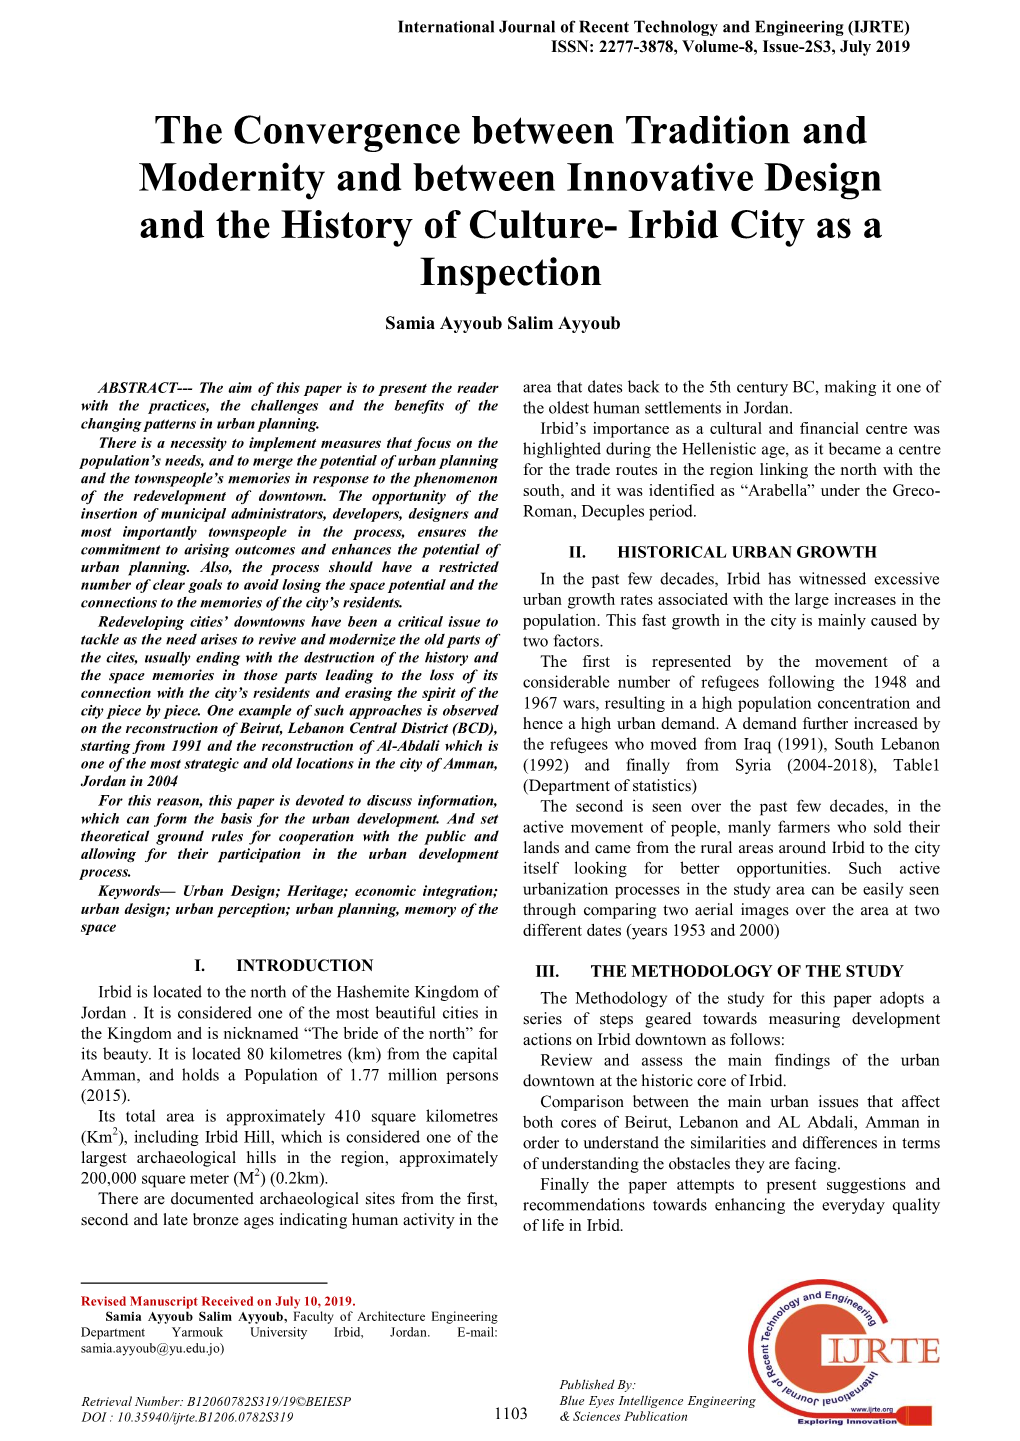 The Convergence Between Tradition and Modernity and Between Innovative Design and the History of Culture- Irbid City As a Inspection